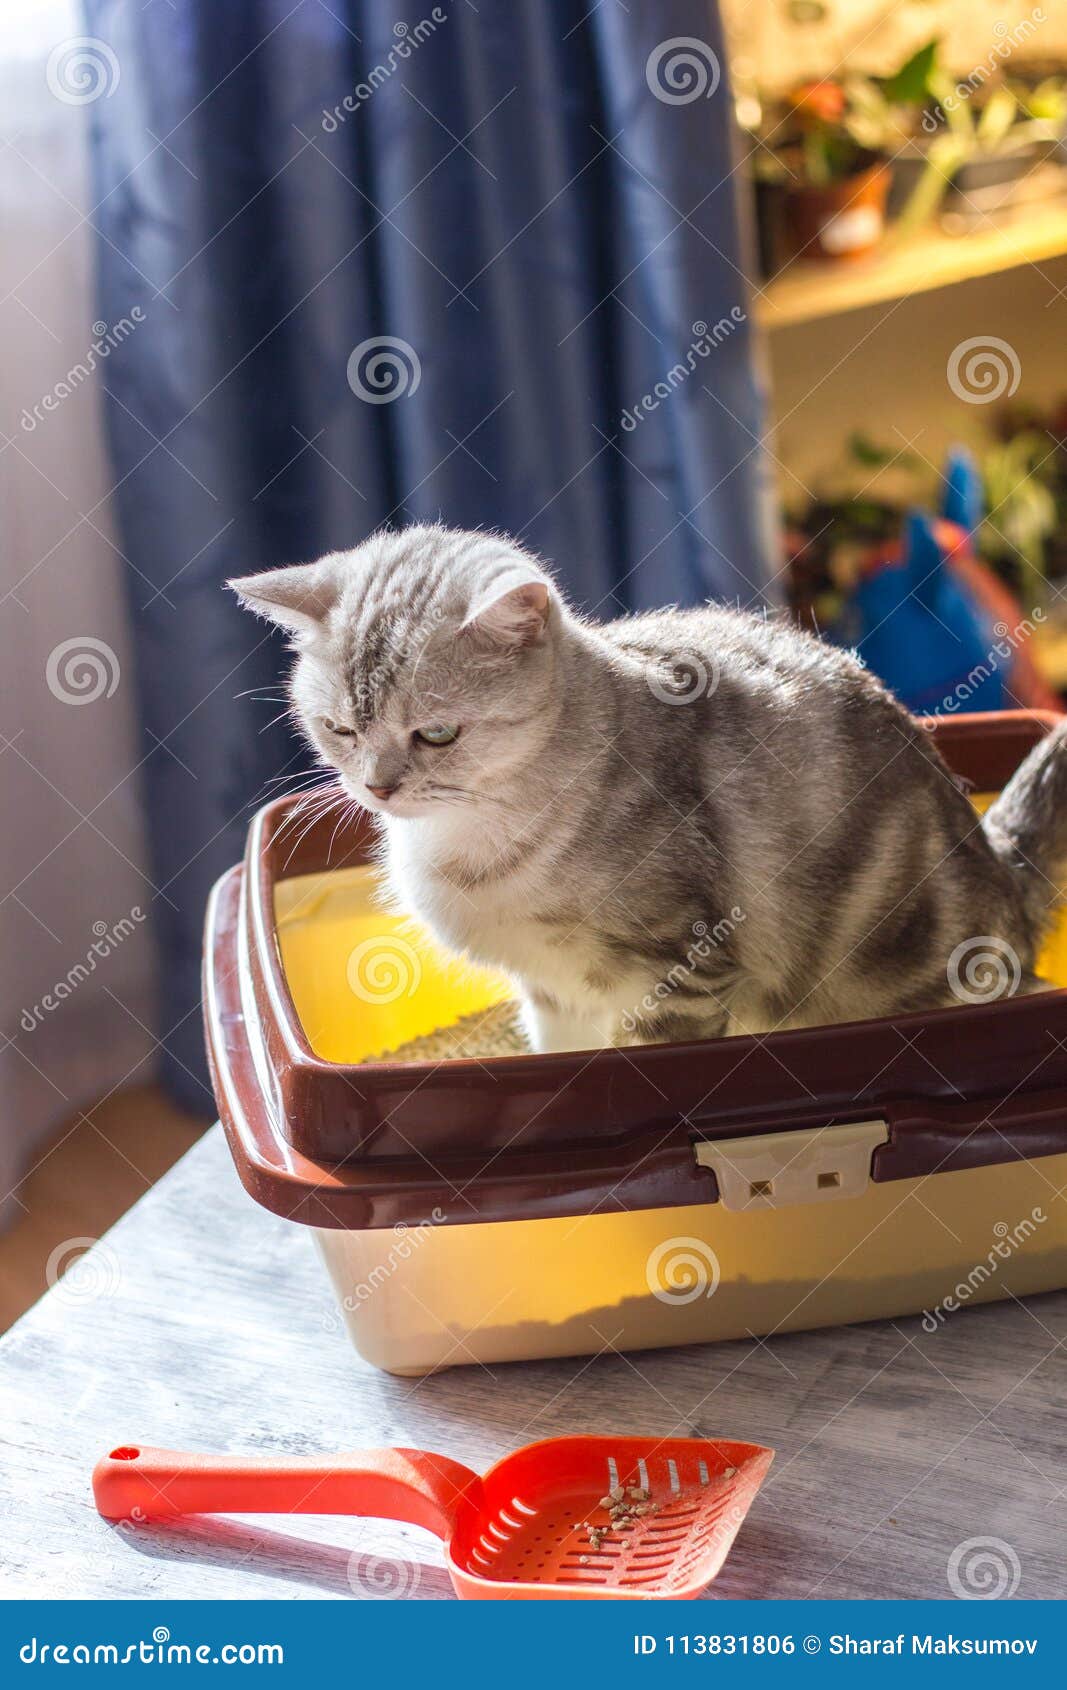 Cat Sitting In A Cat Litter Box Or Tray. Stock Photo Image of object